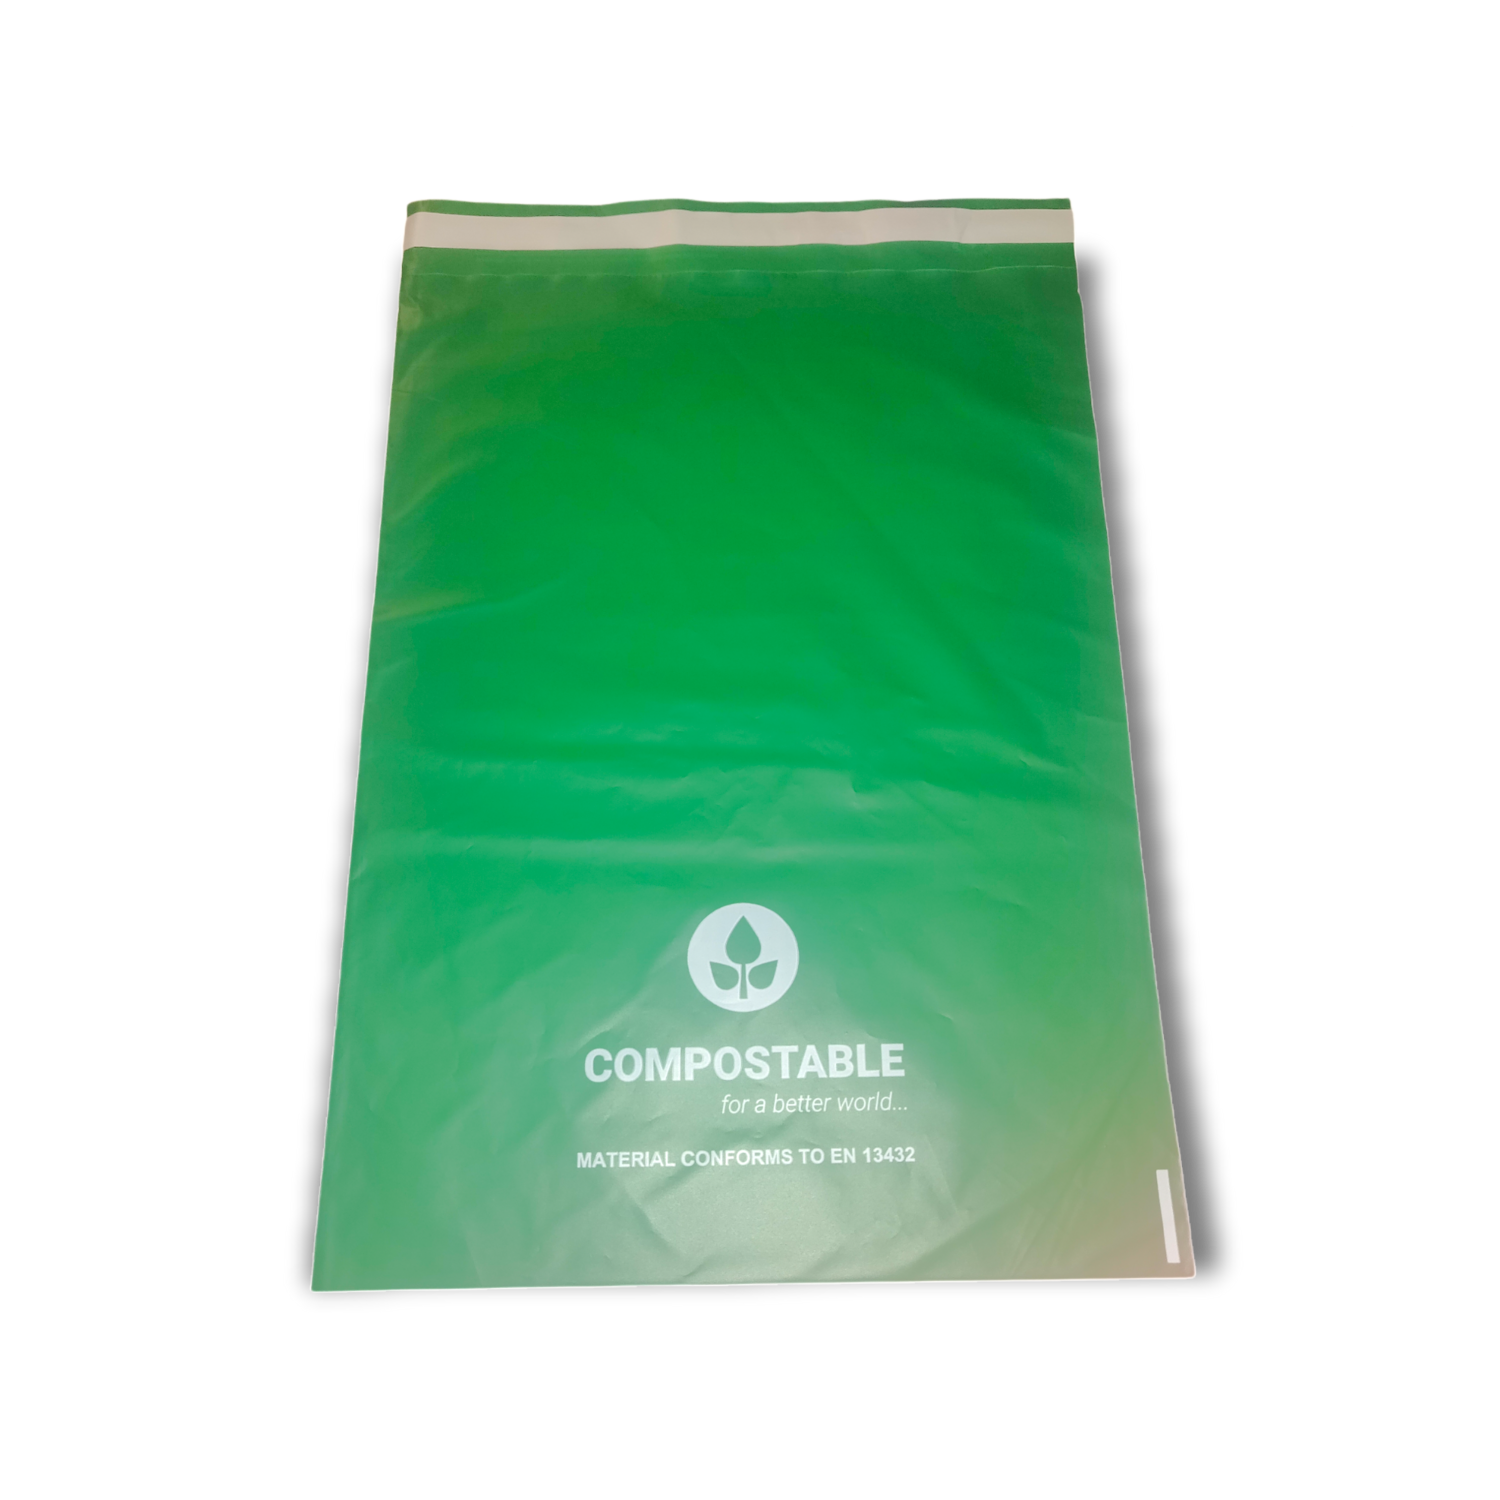 5x 100% Compostable 42 x 35cm Large Green Mailing Bag!